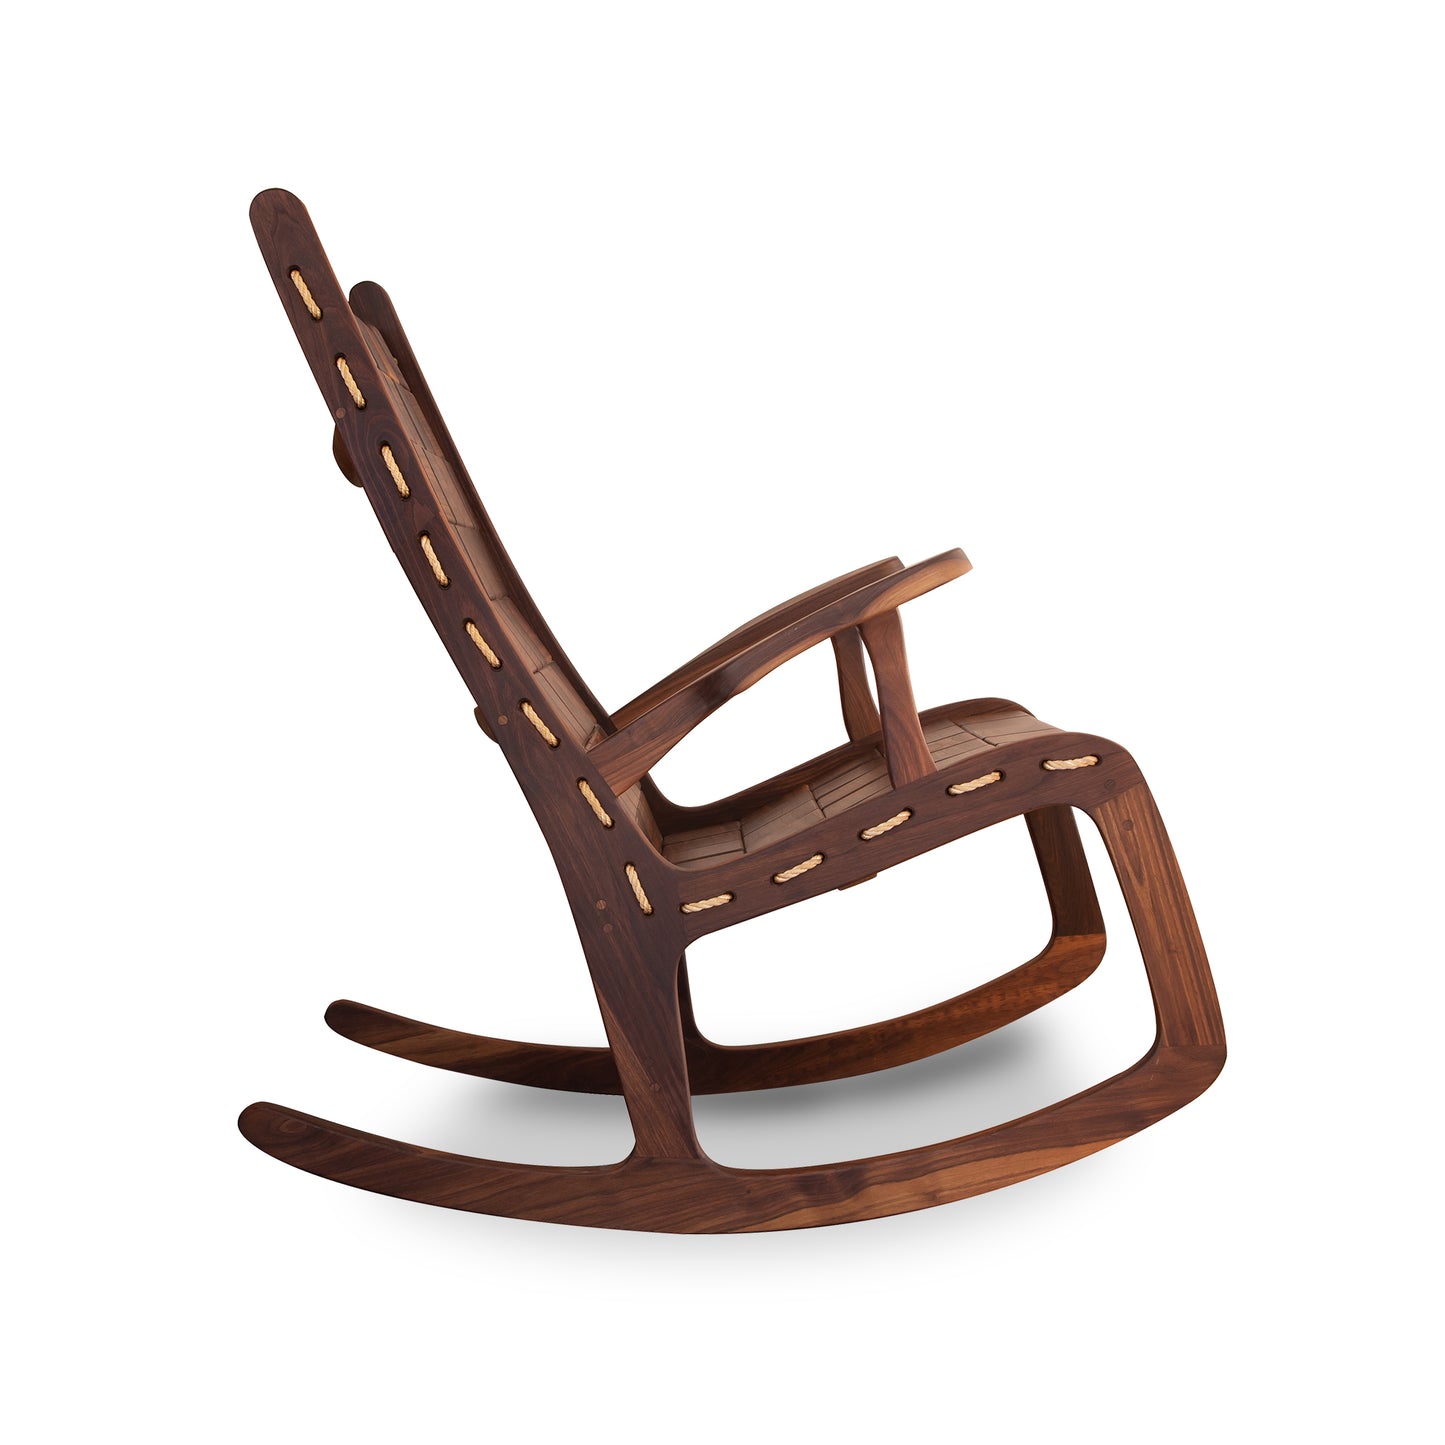 A Quilted Vermont Walnut Rocking Chair with a sleek, modern design, featuring lighter wood inlay details on the dark brown slats, in the shaker style, isolated on a white background by Vermont Folk Rocker.